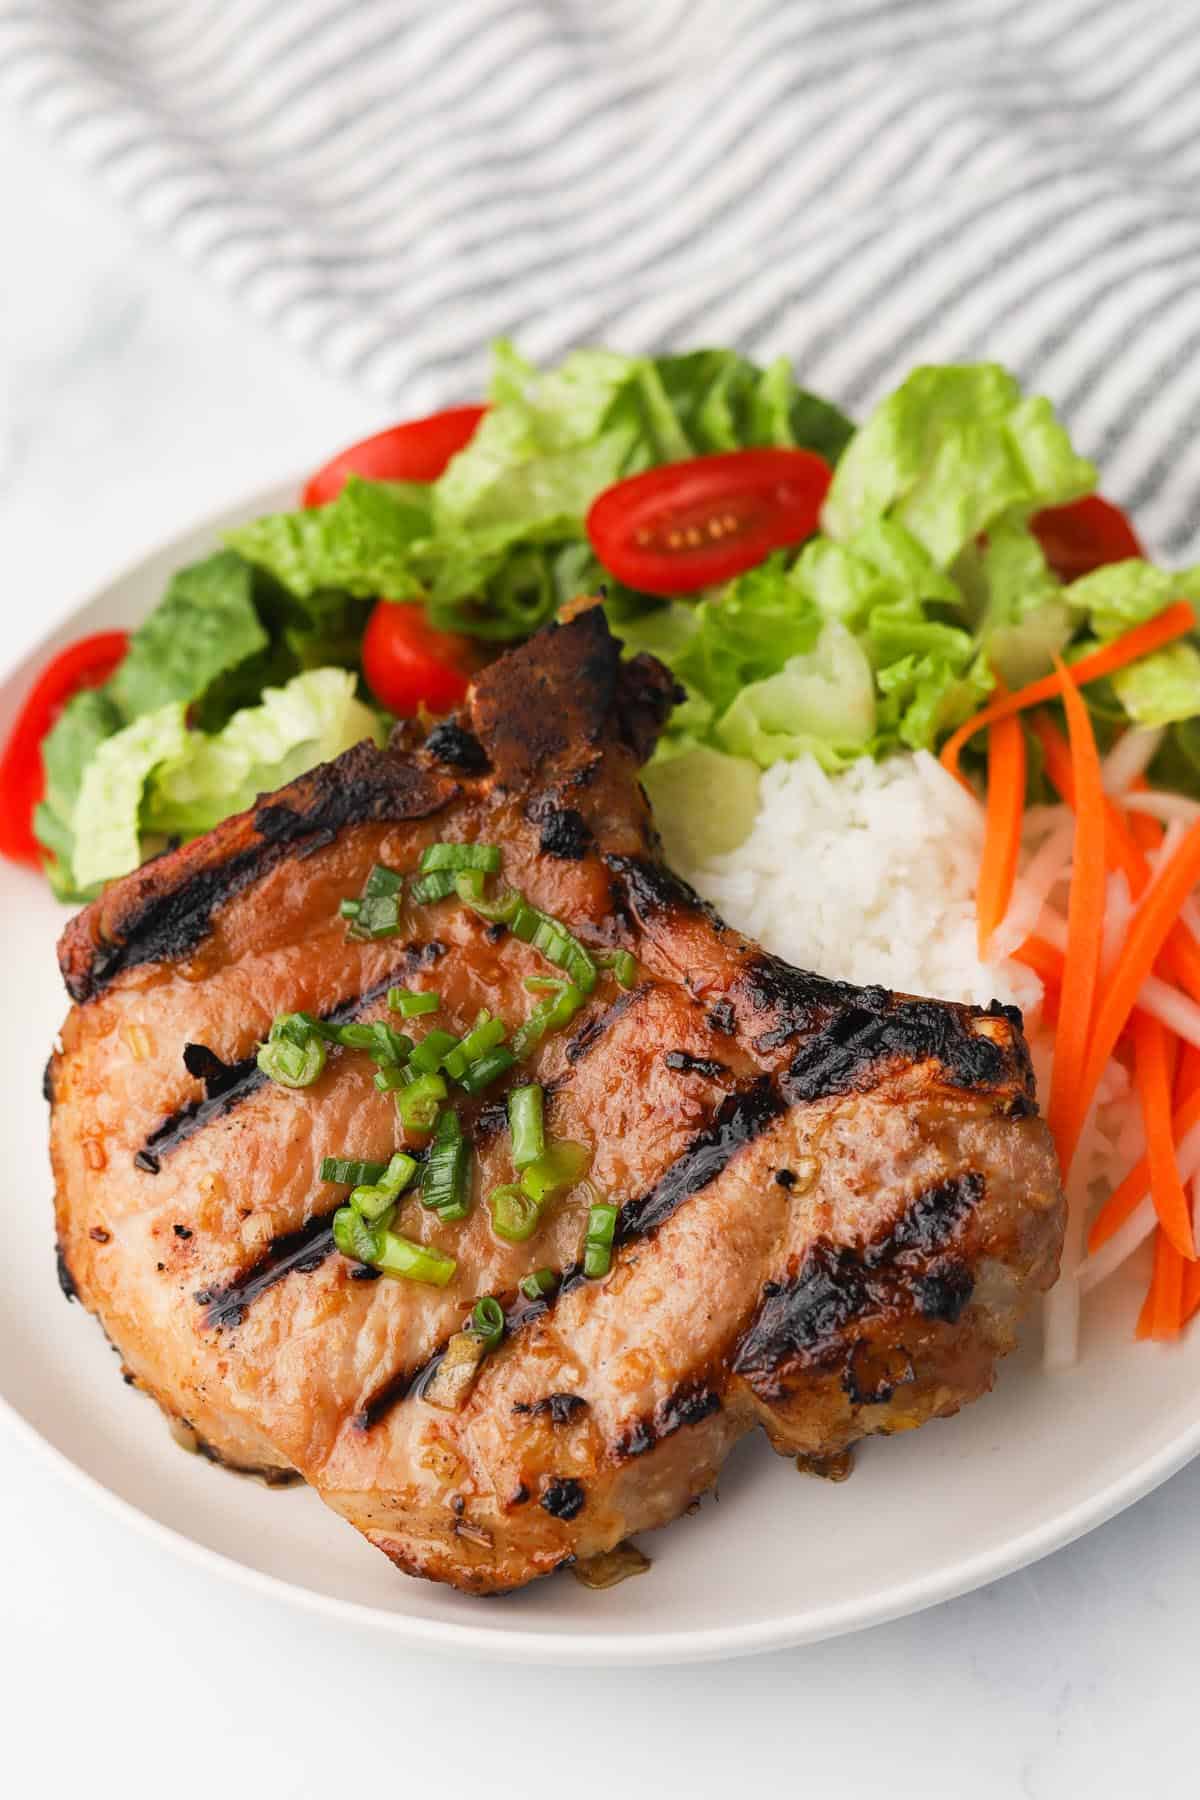 Grilled pork chop with rice and side of salad.